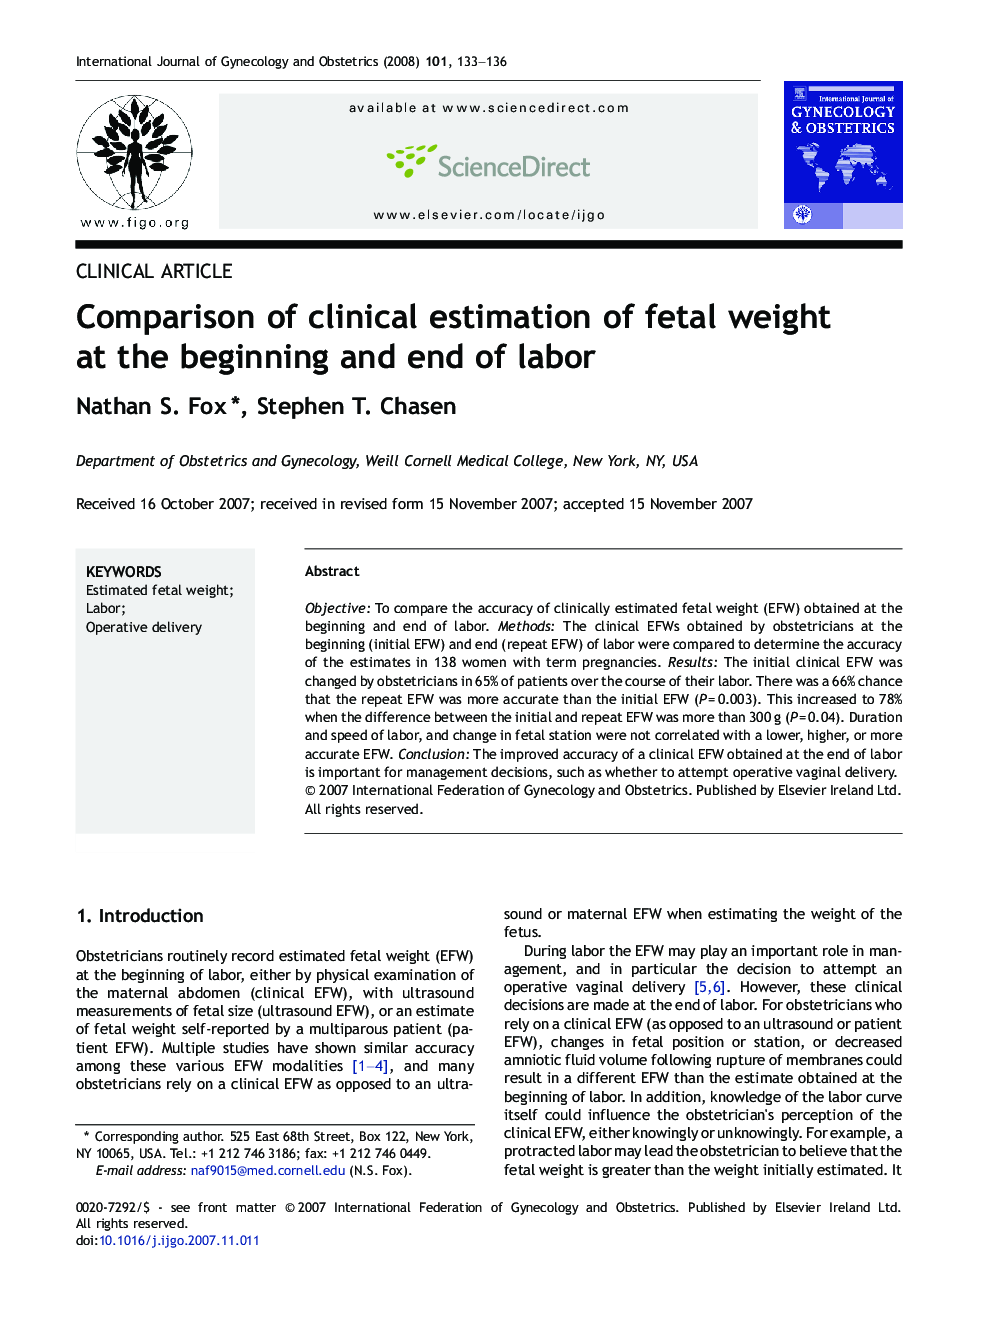 Comparison of clinical estimation of fetal weight at the beginning and end of labor